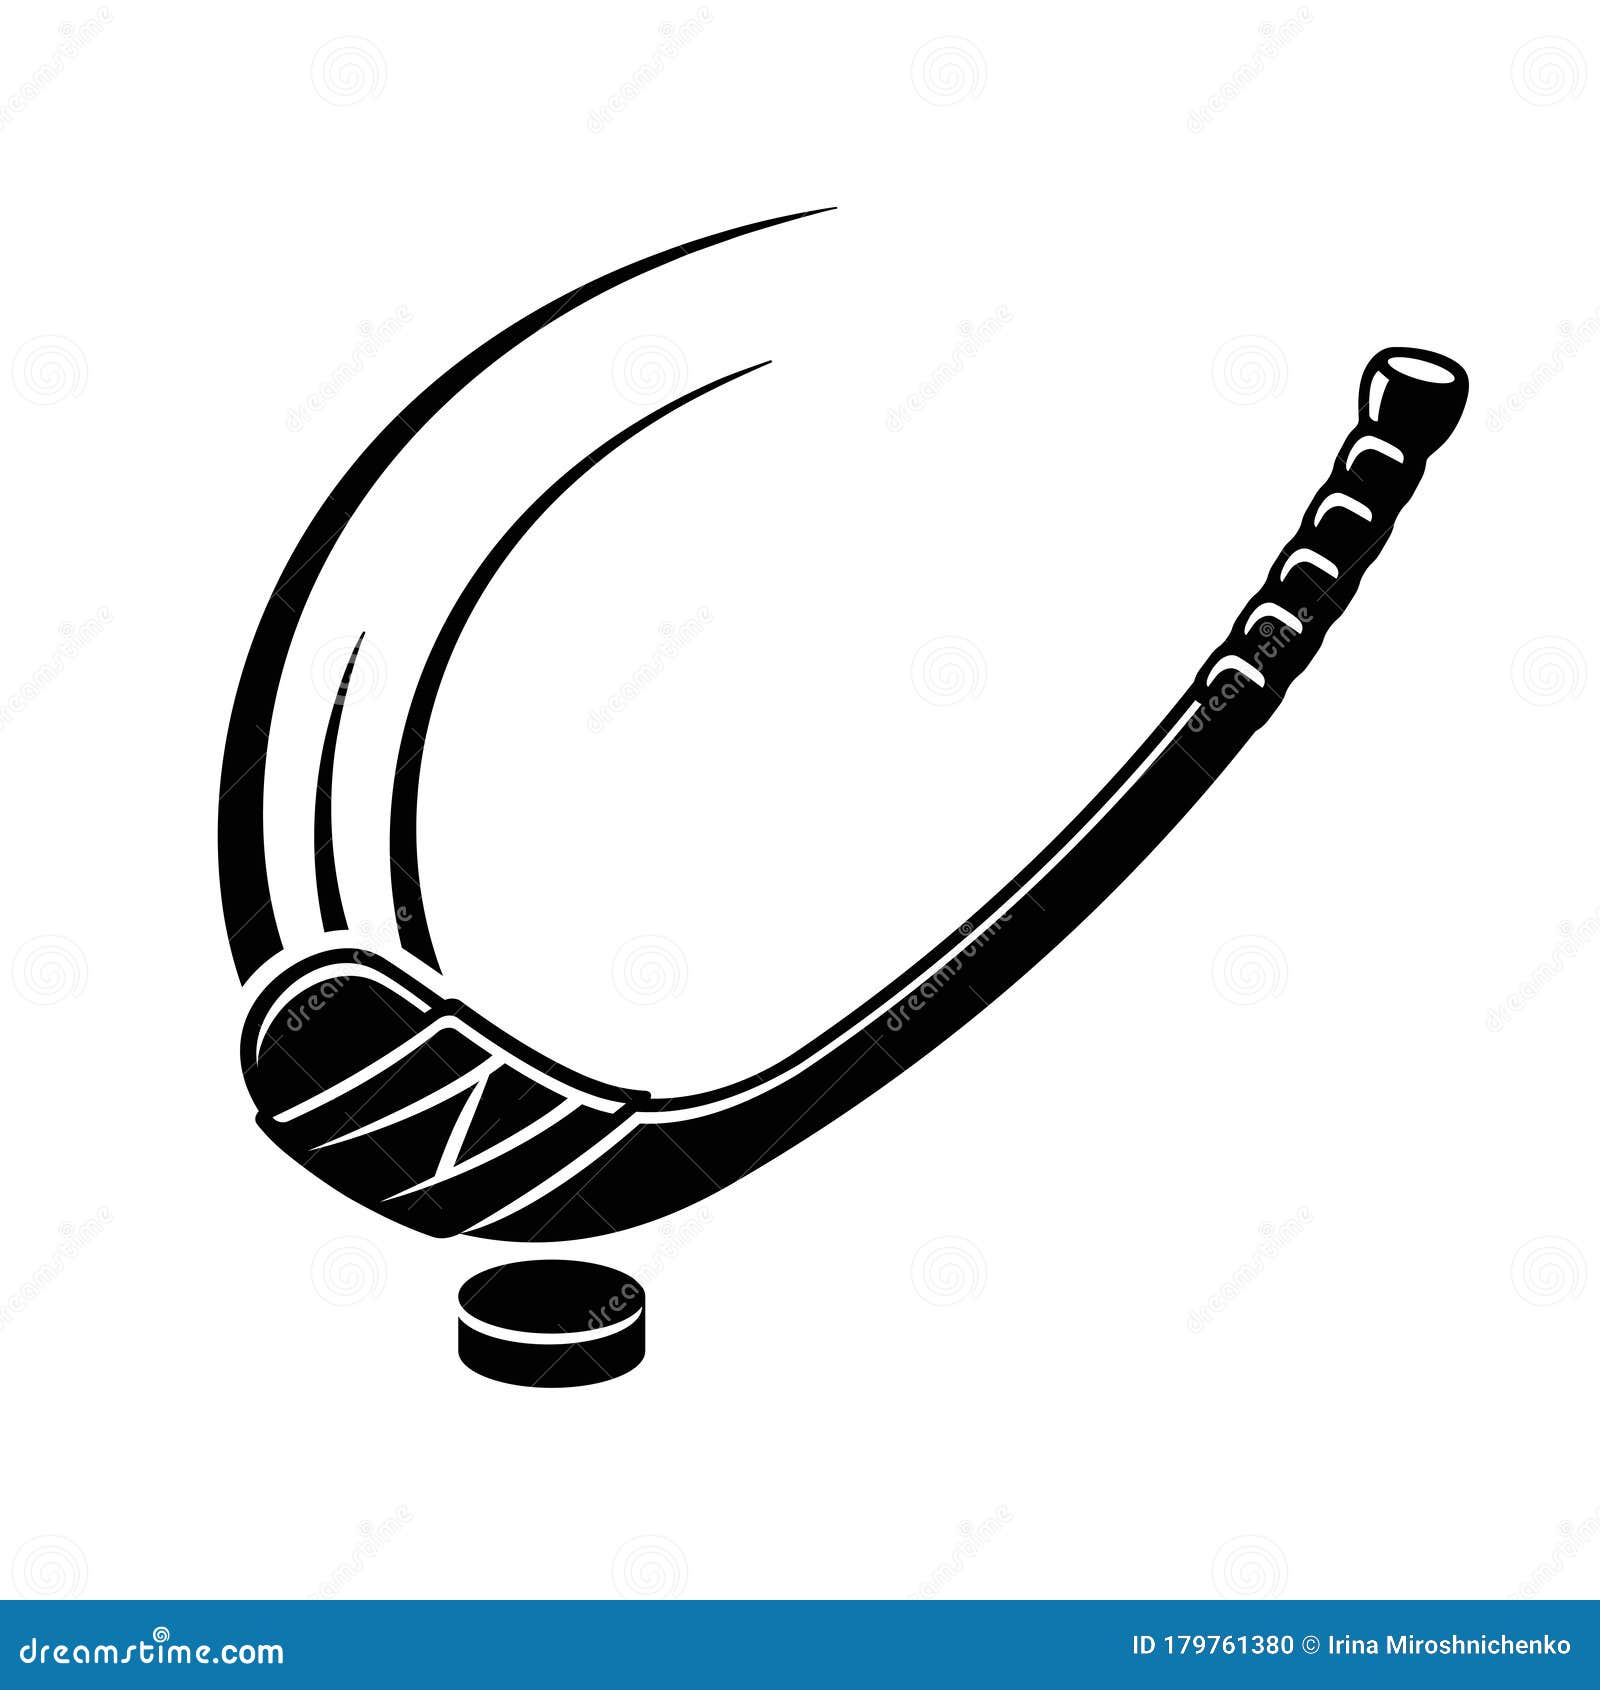 Ice hockey puck and stick vector illustration.